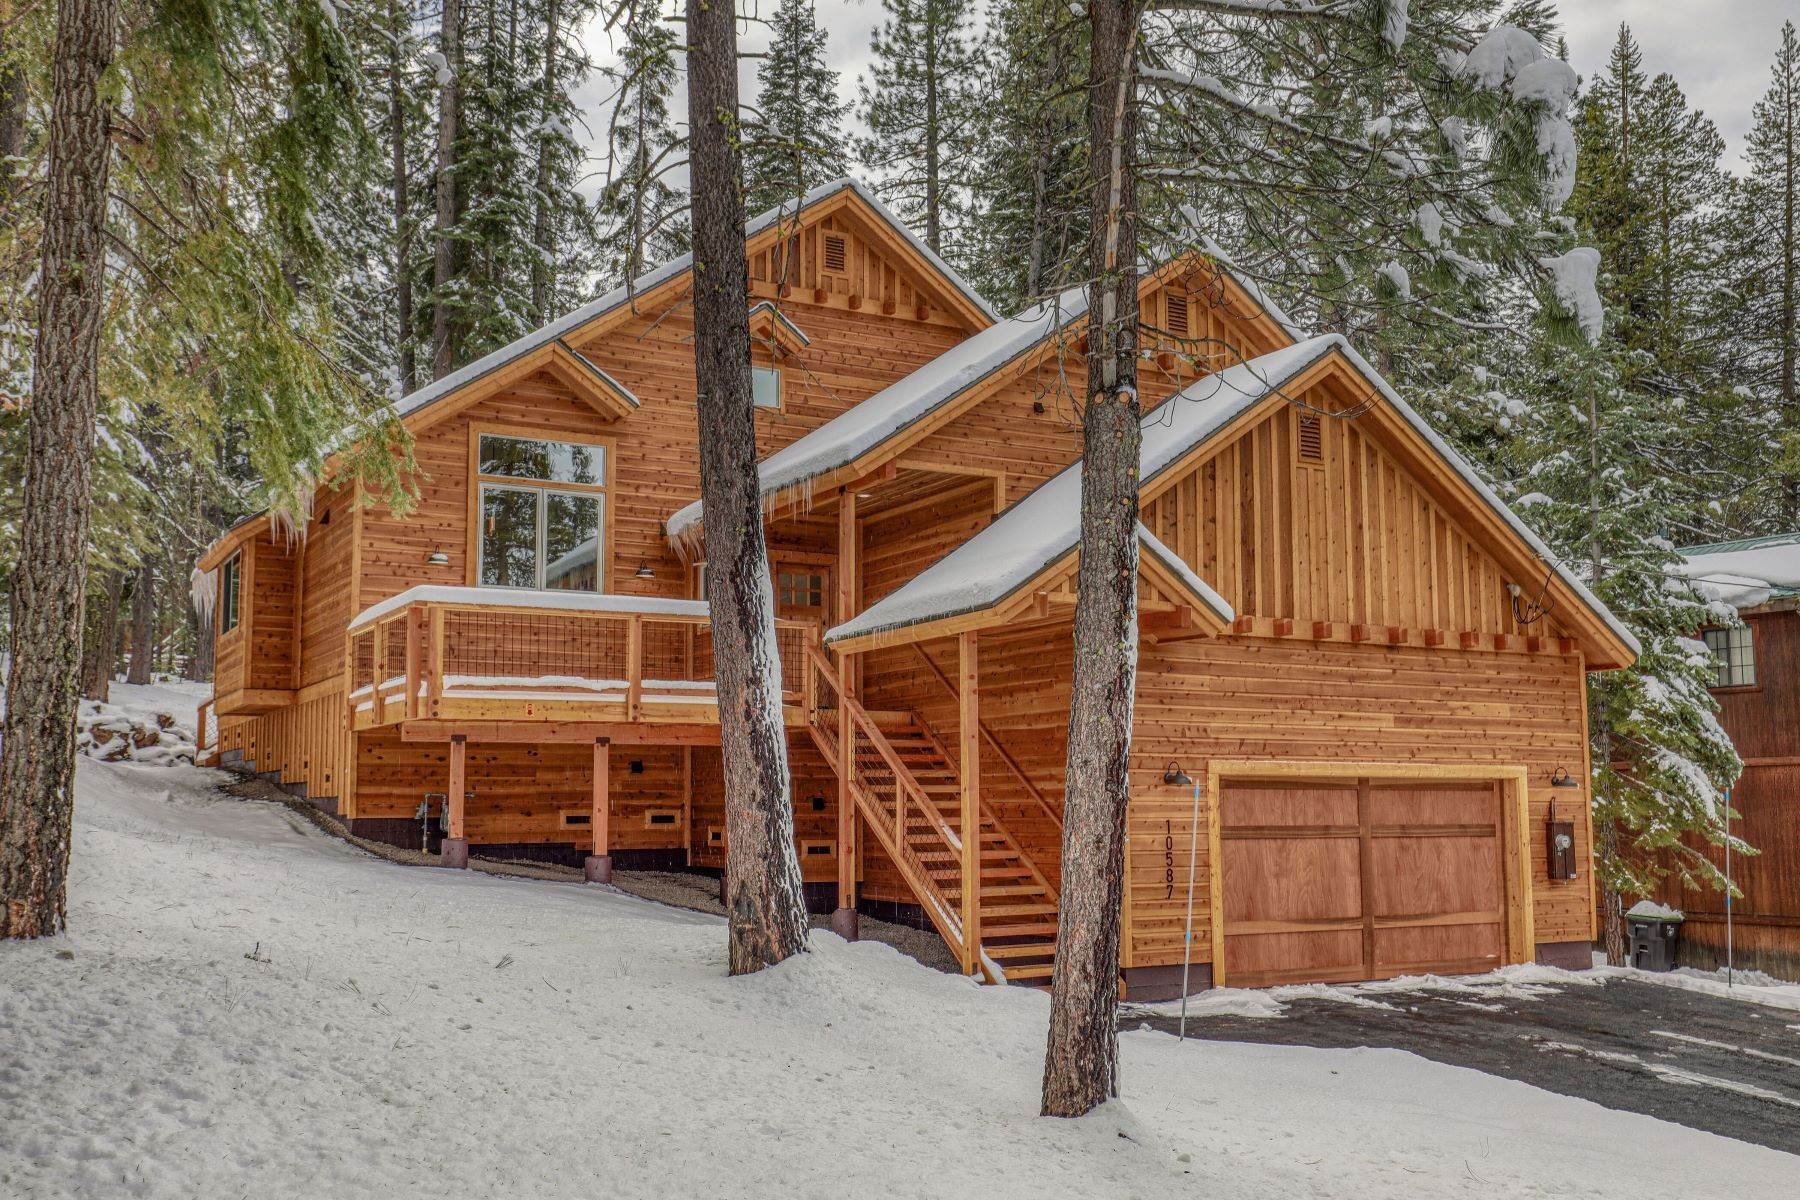 Property for Active at New Construction in Tahoe Donner 10587 Mougle Lane Truckee, California 96161 United States